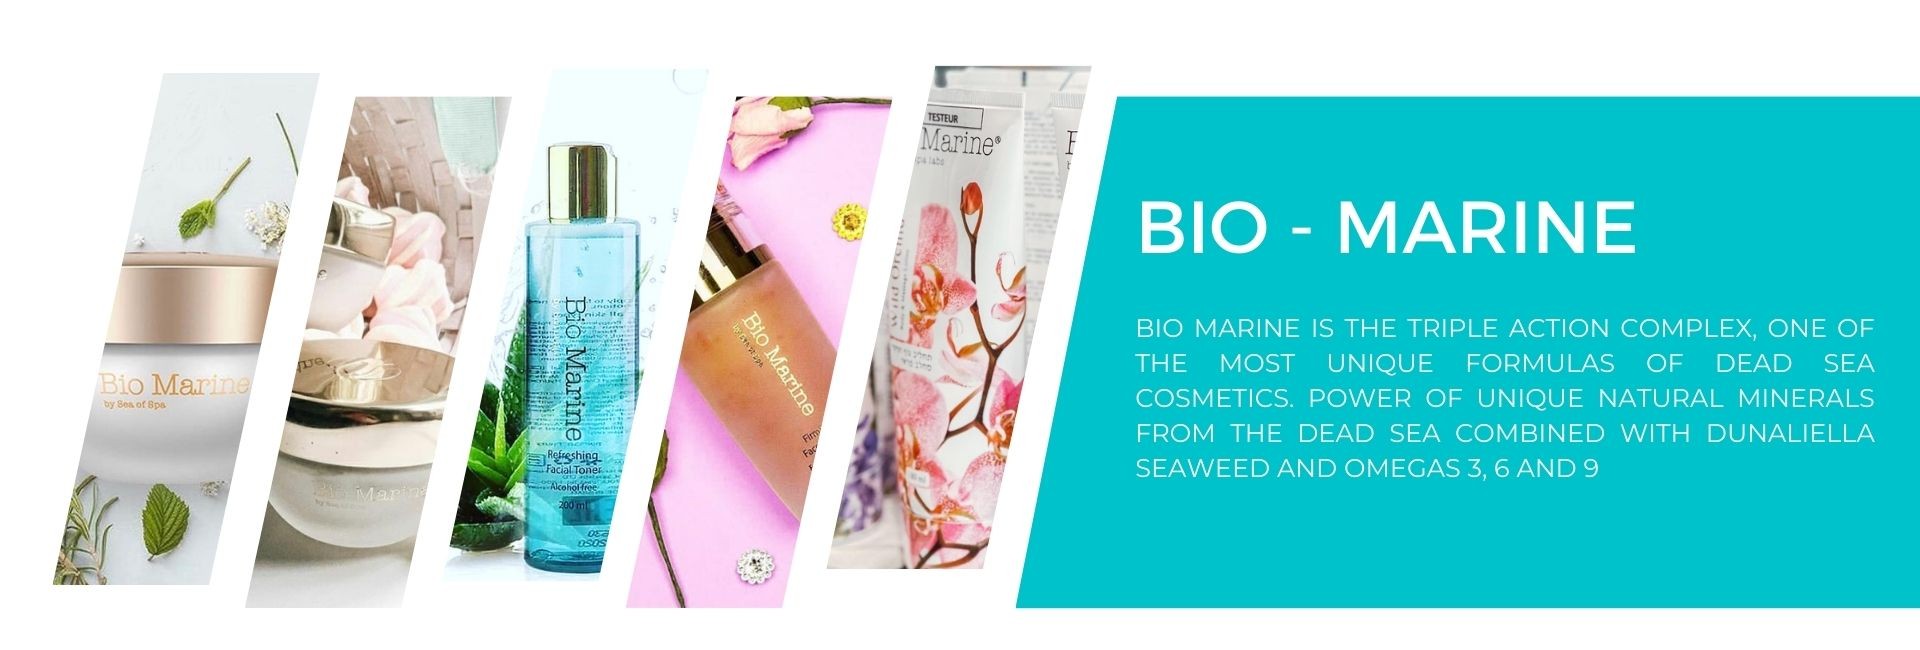 BIO MARINE IS THE TRIPLE ACTION COMPLEX, ONE OF THE MOST UNIQUE FORMULAS OF DEAD SEA COSMETICS. POWER OF UNIQUE NATURAL MINERALS FROM THE DEAD SEA COMBINED WITH DUNALIELLA SEAWEED AND OMEGAS 3, 6 AND 9